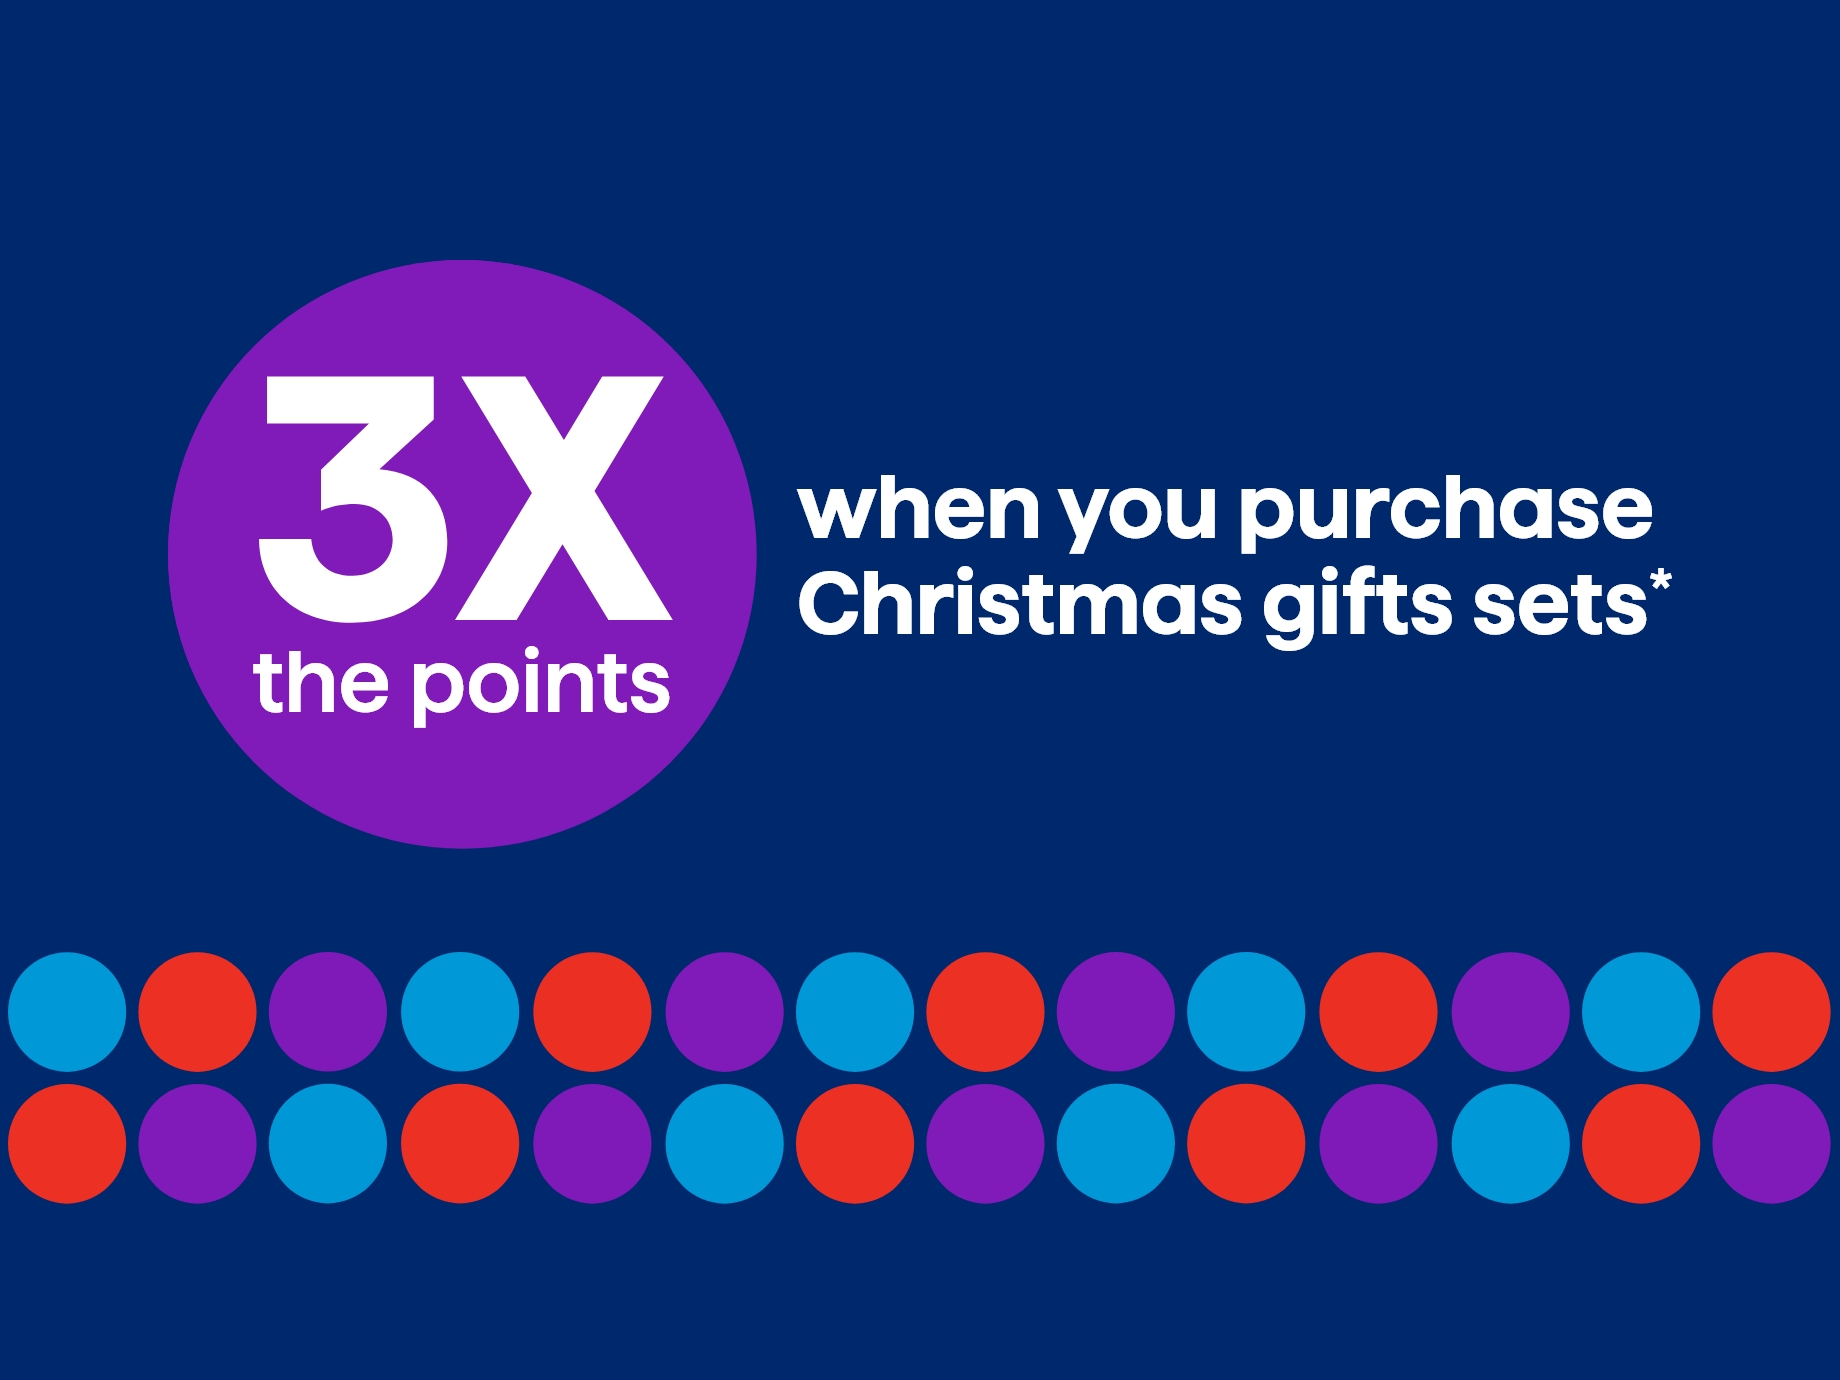 3x the points when you purchase Christmas gifts sets*